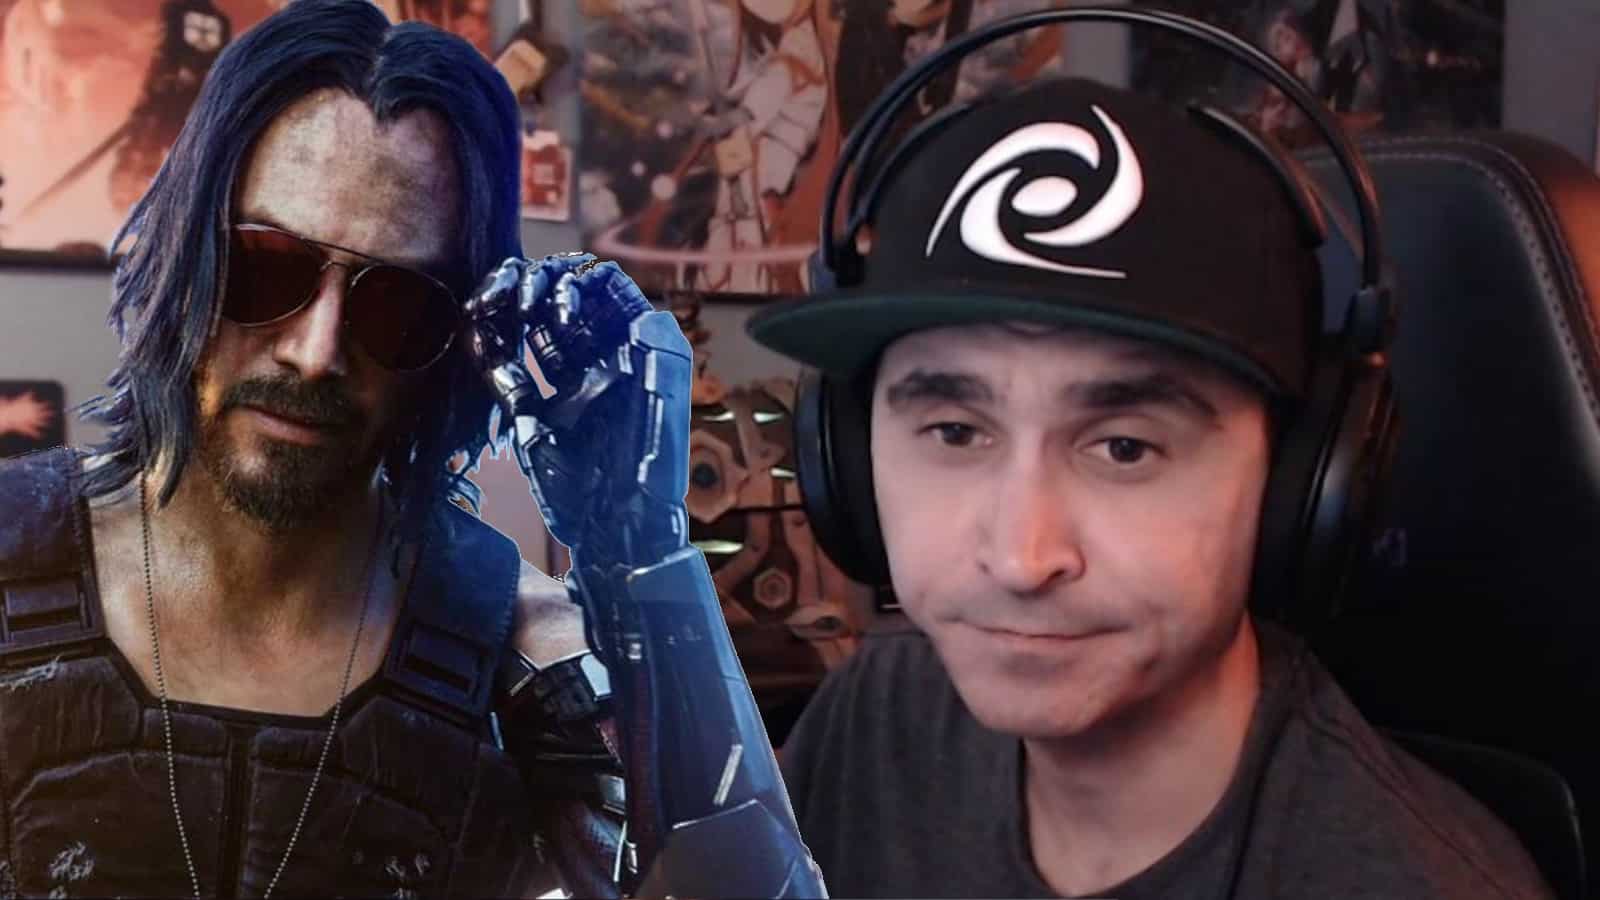 Johnny Silverhand and Summit1g